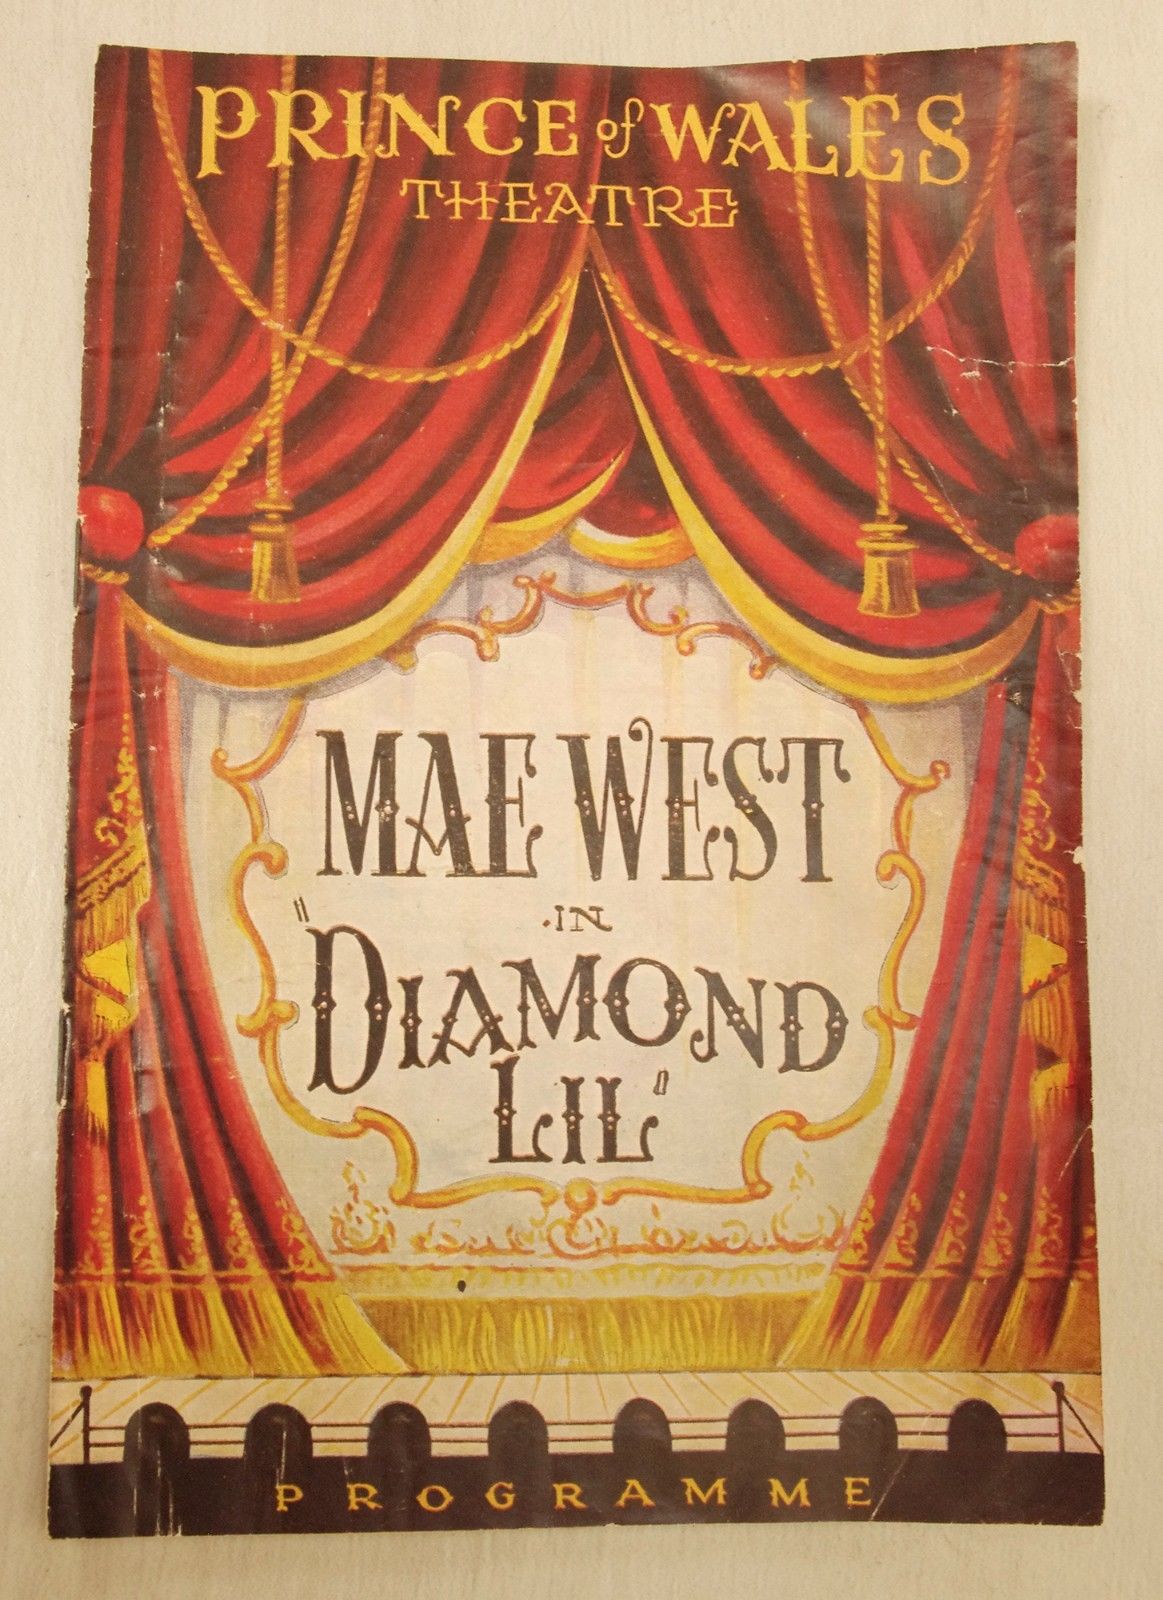 MAE WEST  in "DIAMOND LIL" Prince of Wales Original Theatre Programme